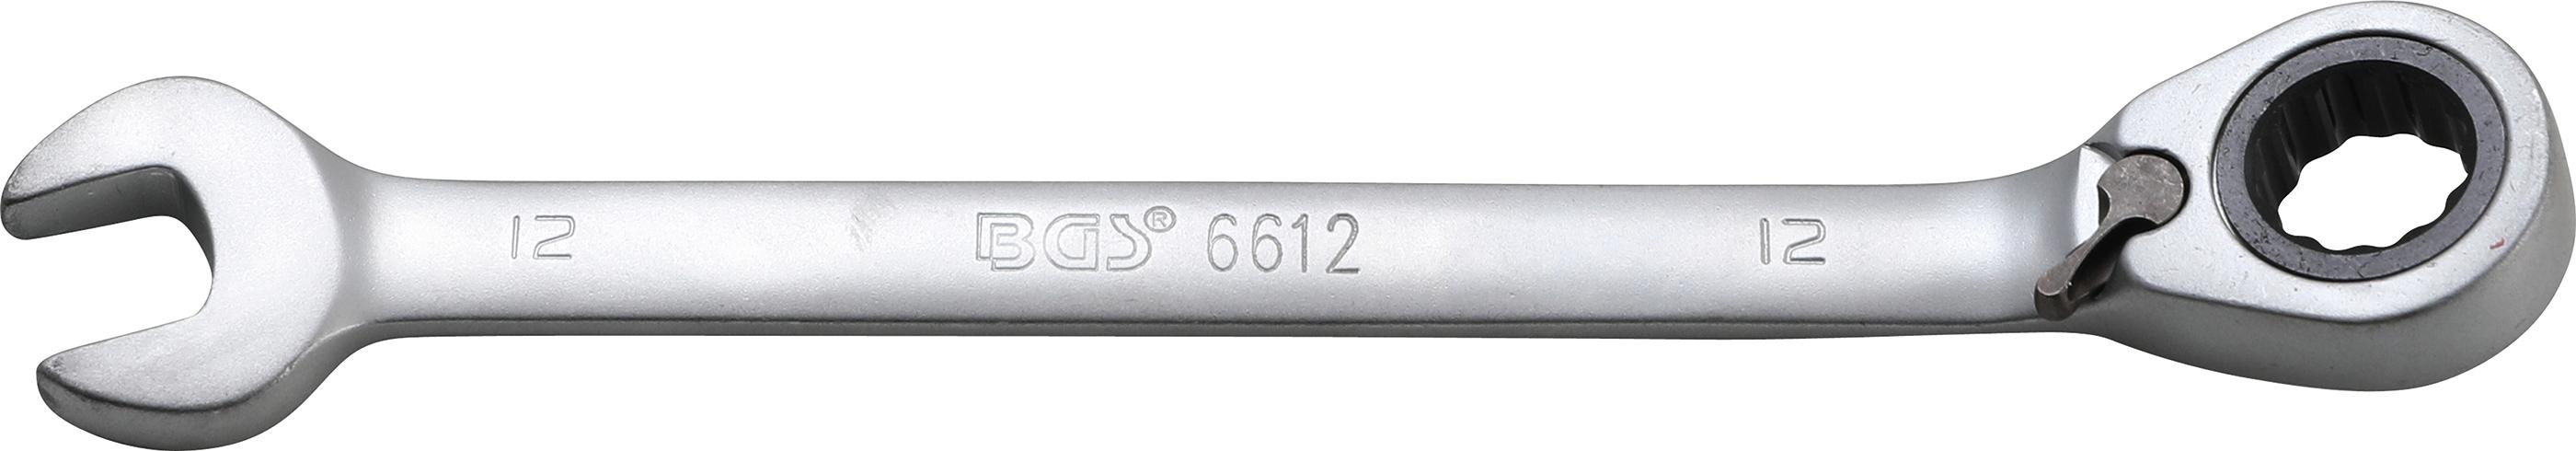 Ratchet Combination Wrench | reversible | 12 mm (6612)